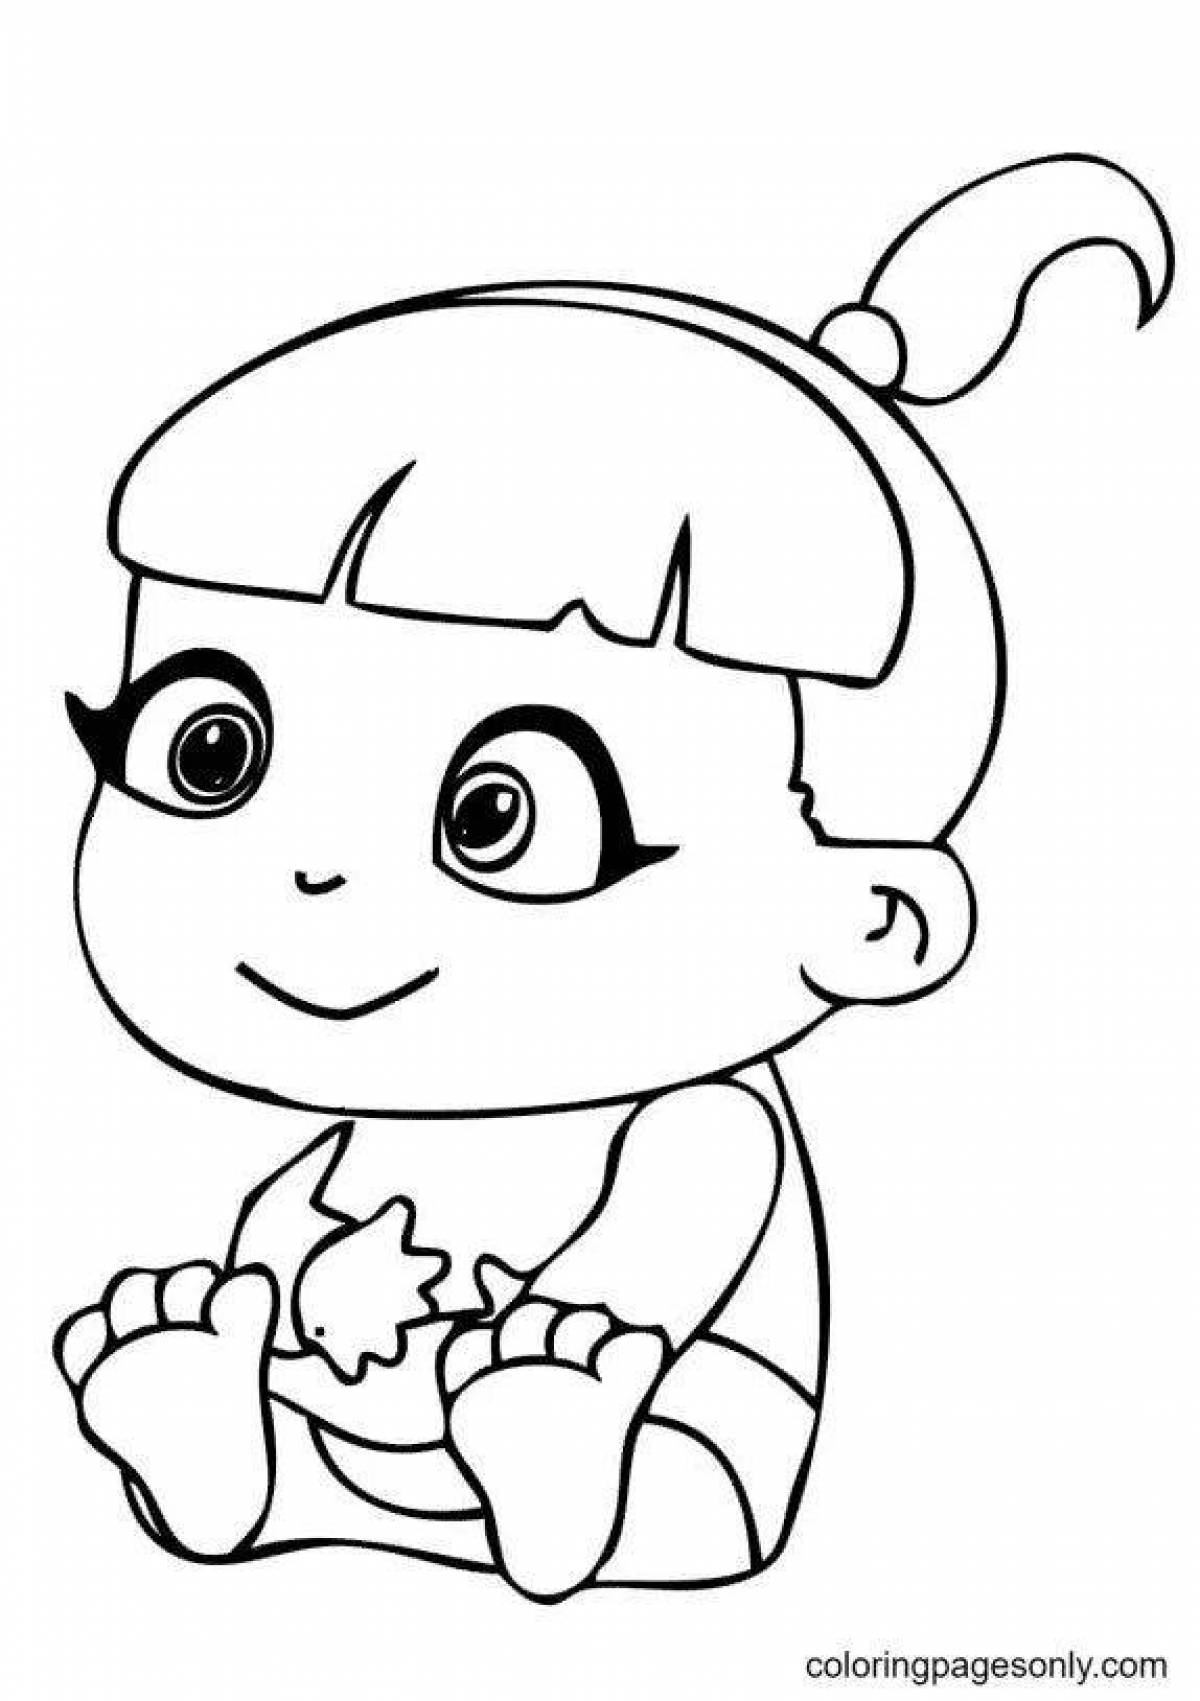 Color-mania lala coloring page